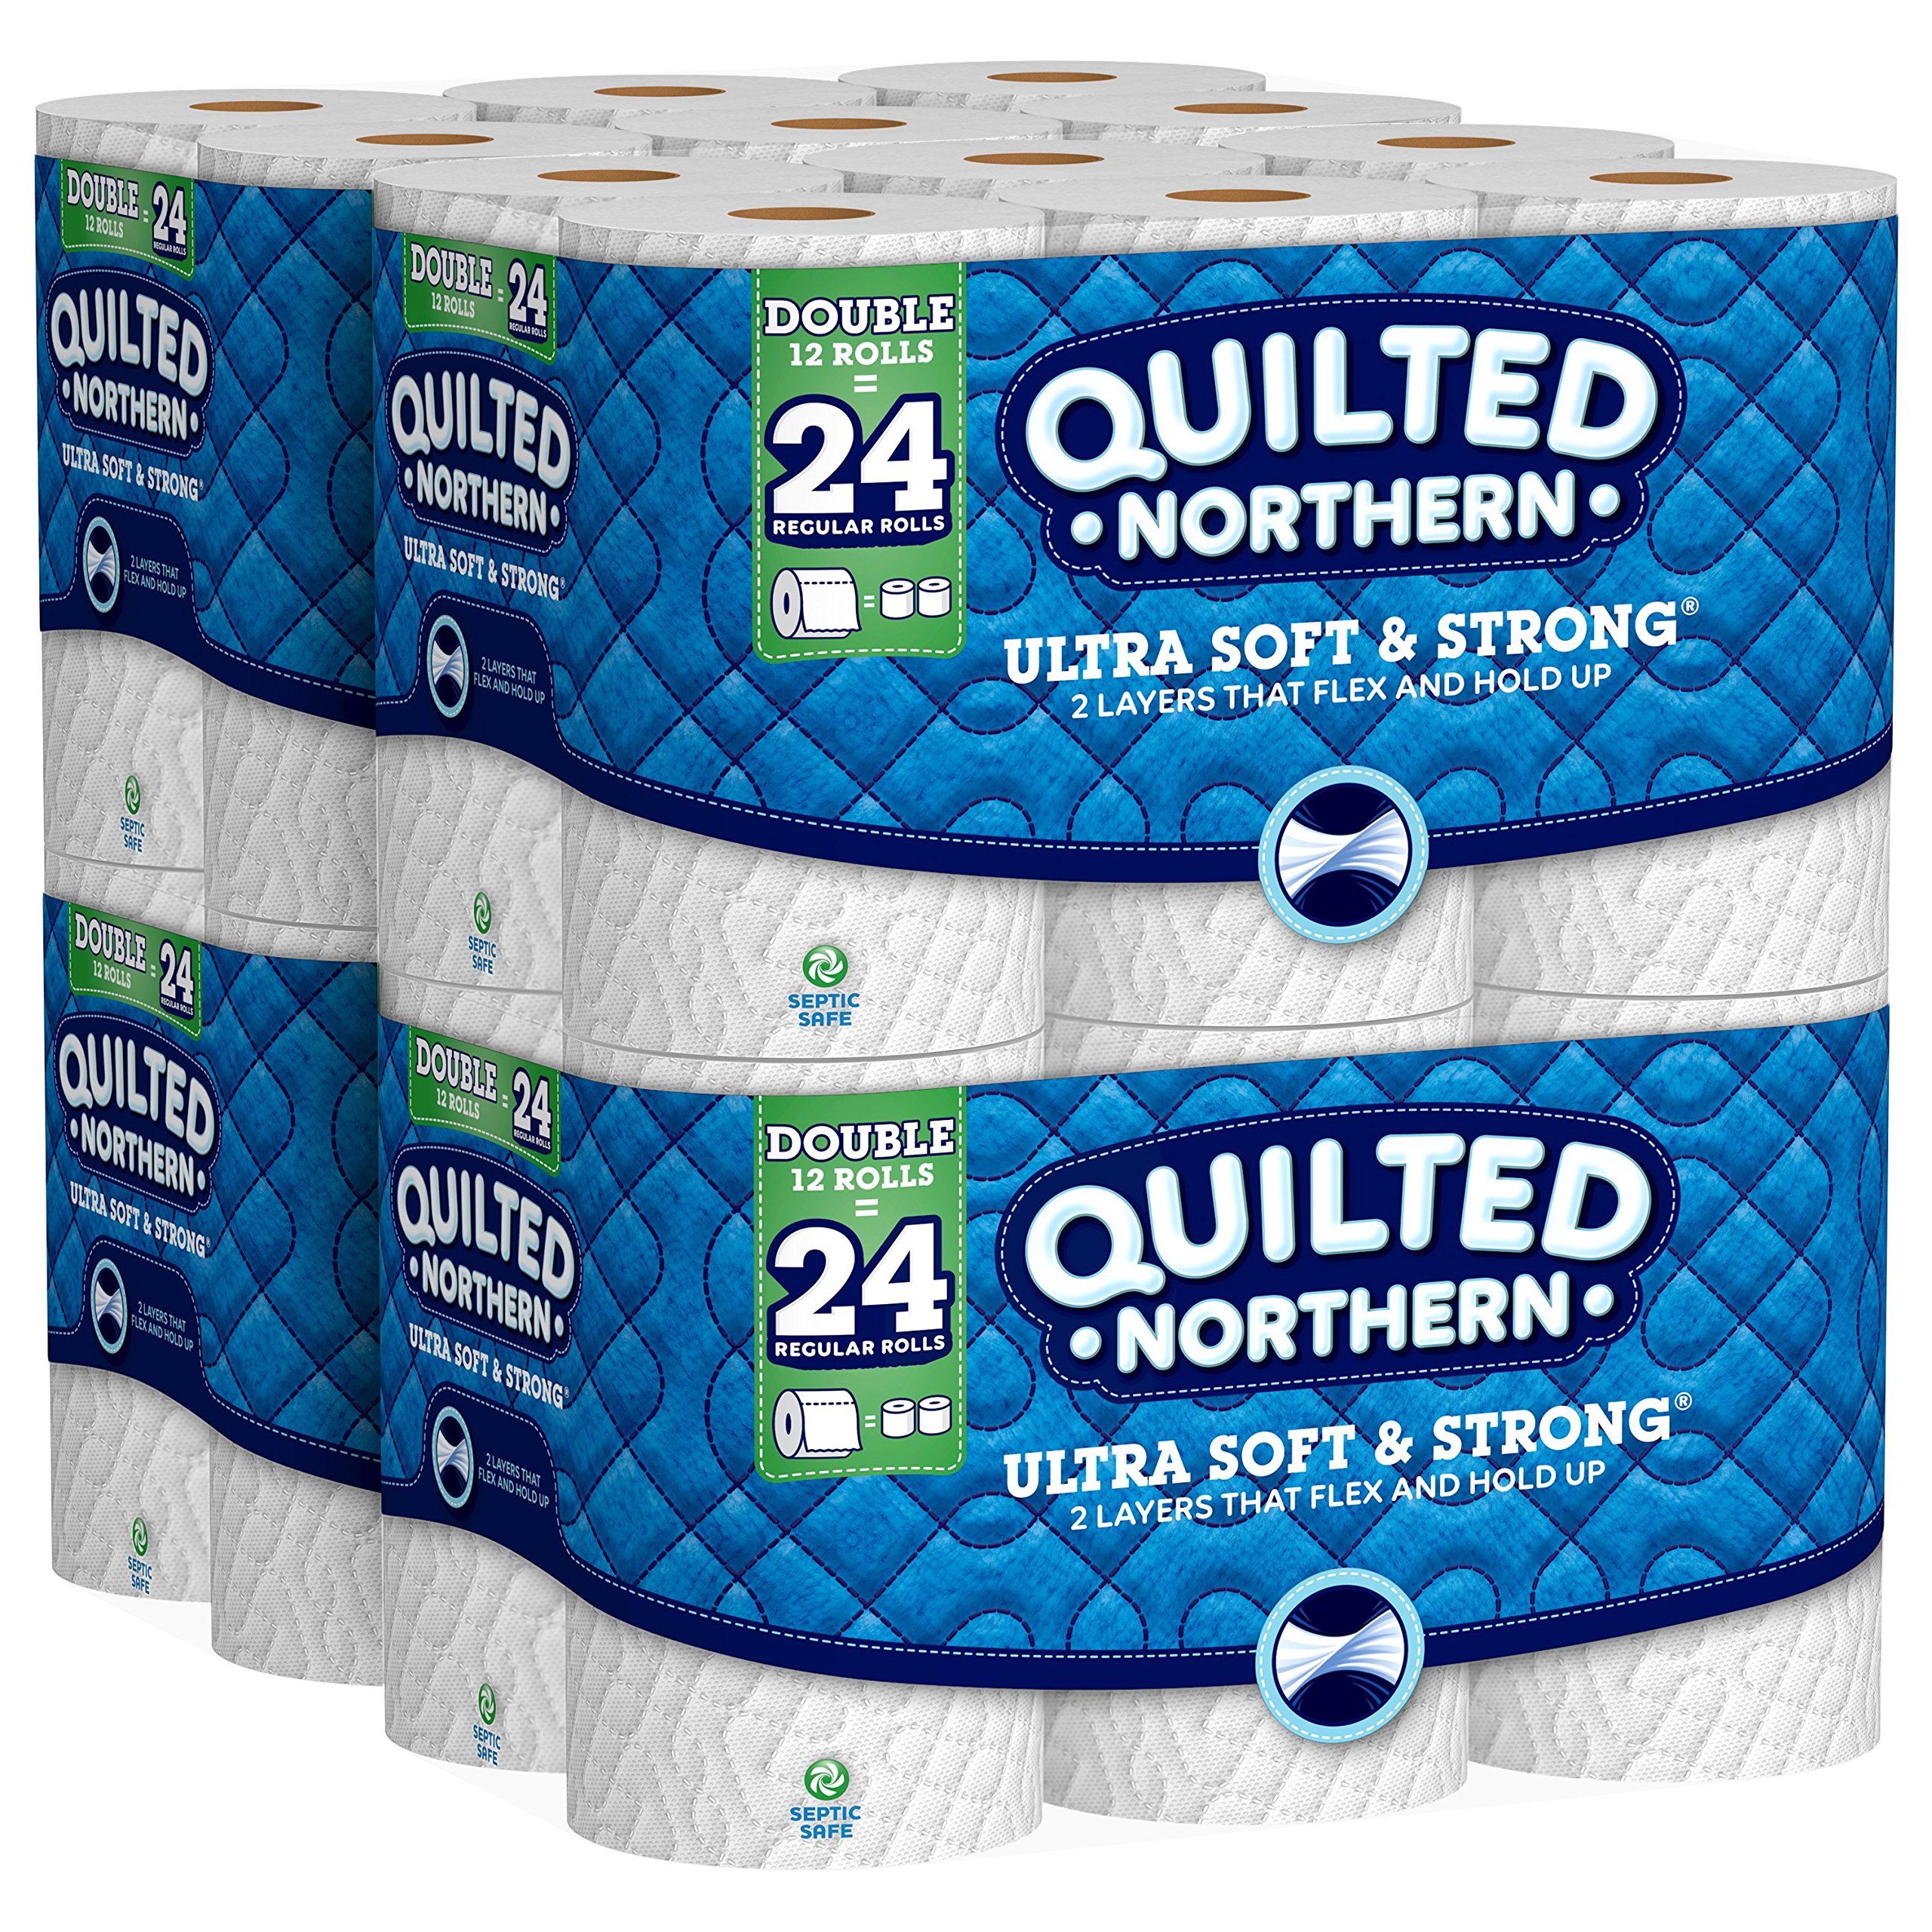 Book Cover Quilted Northern Ultra Soft & Strong Toilet Paper, 48 Double Rolls, 48 = 96 Regular Rolls,12 Count (Pack of 4)